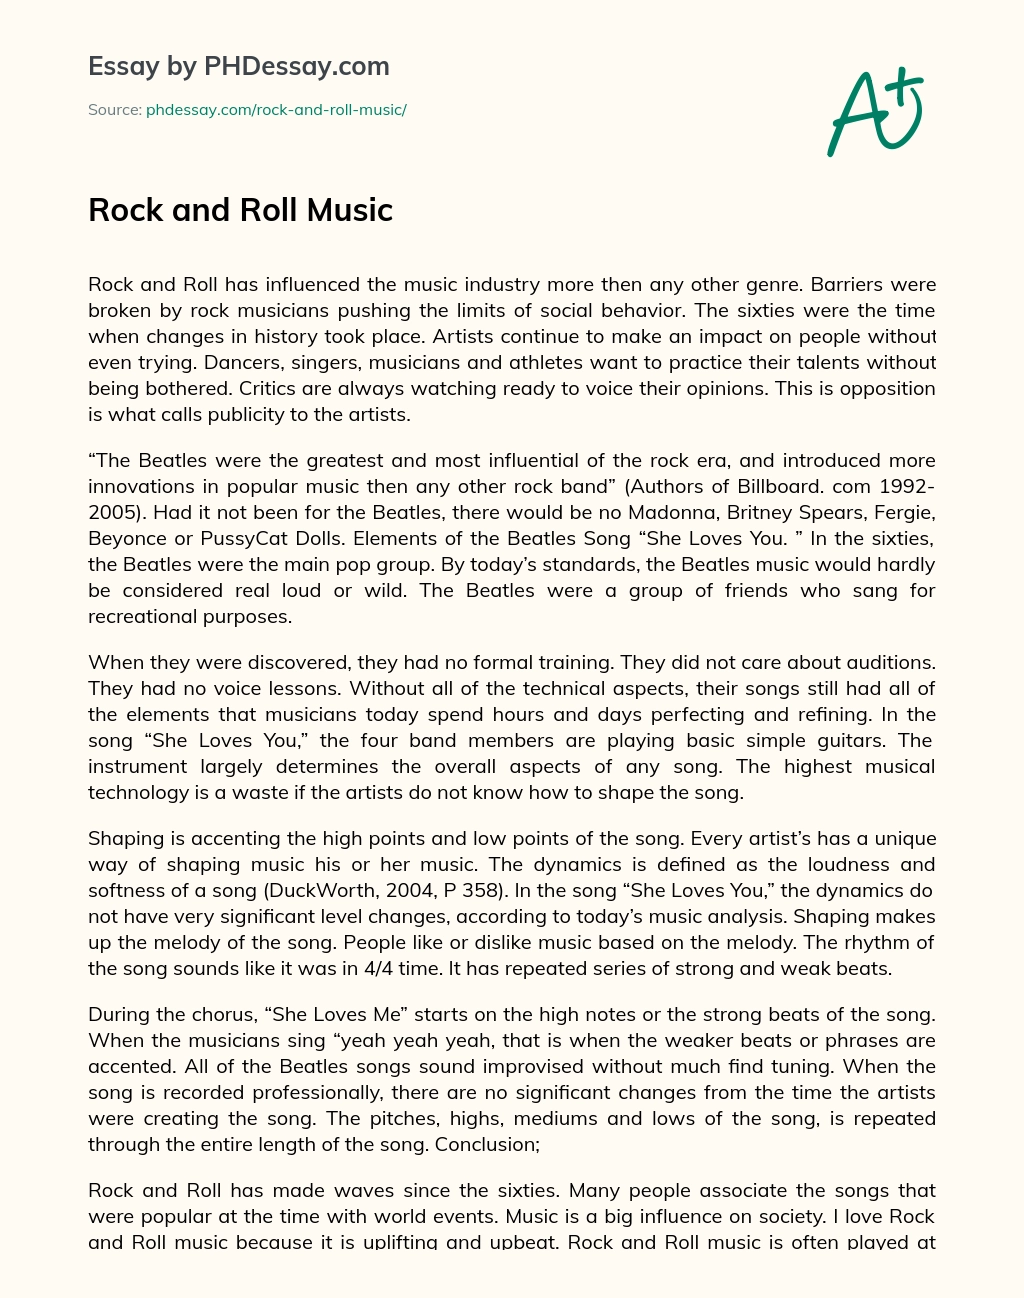 Rock and Roll Music essay